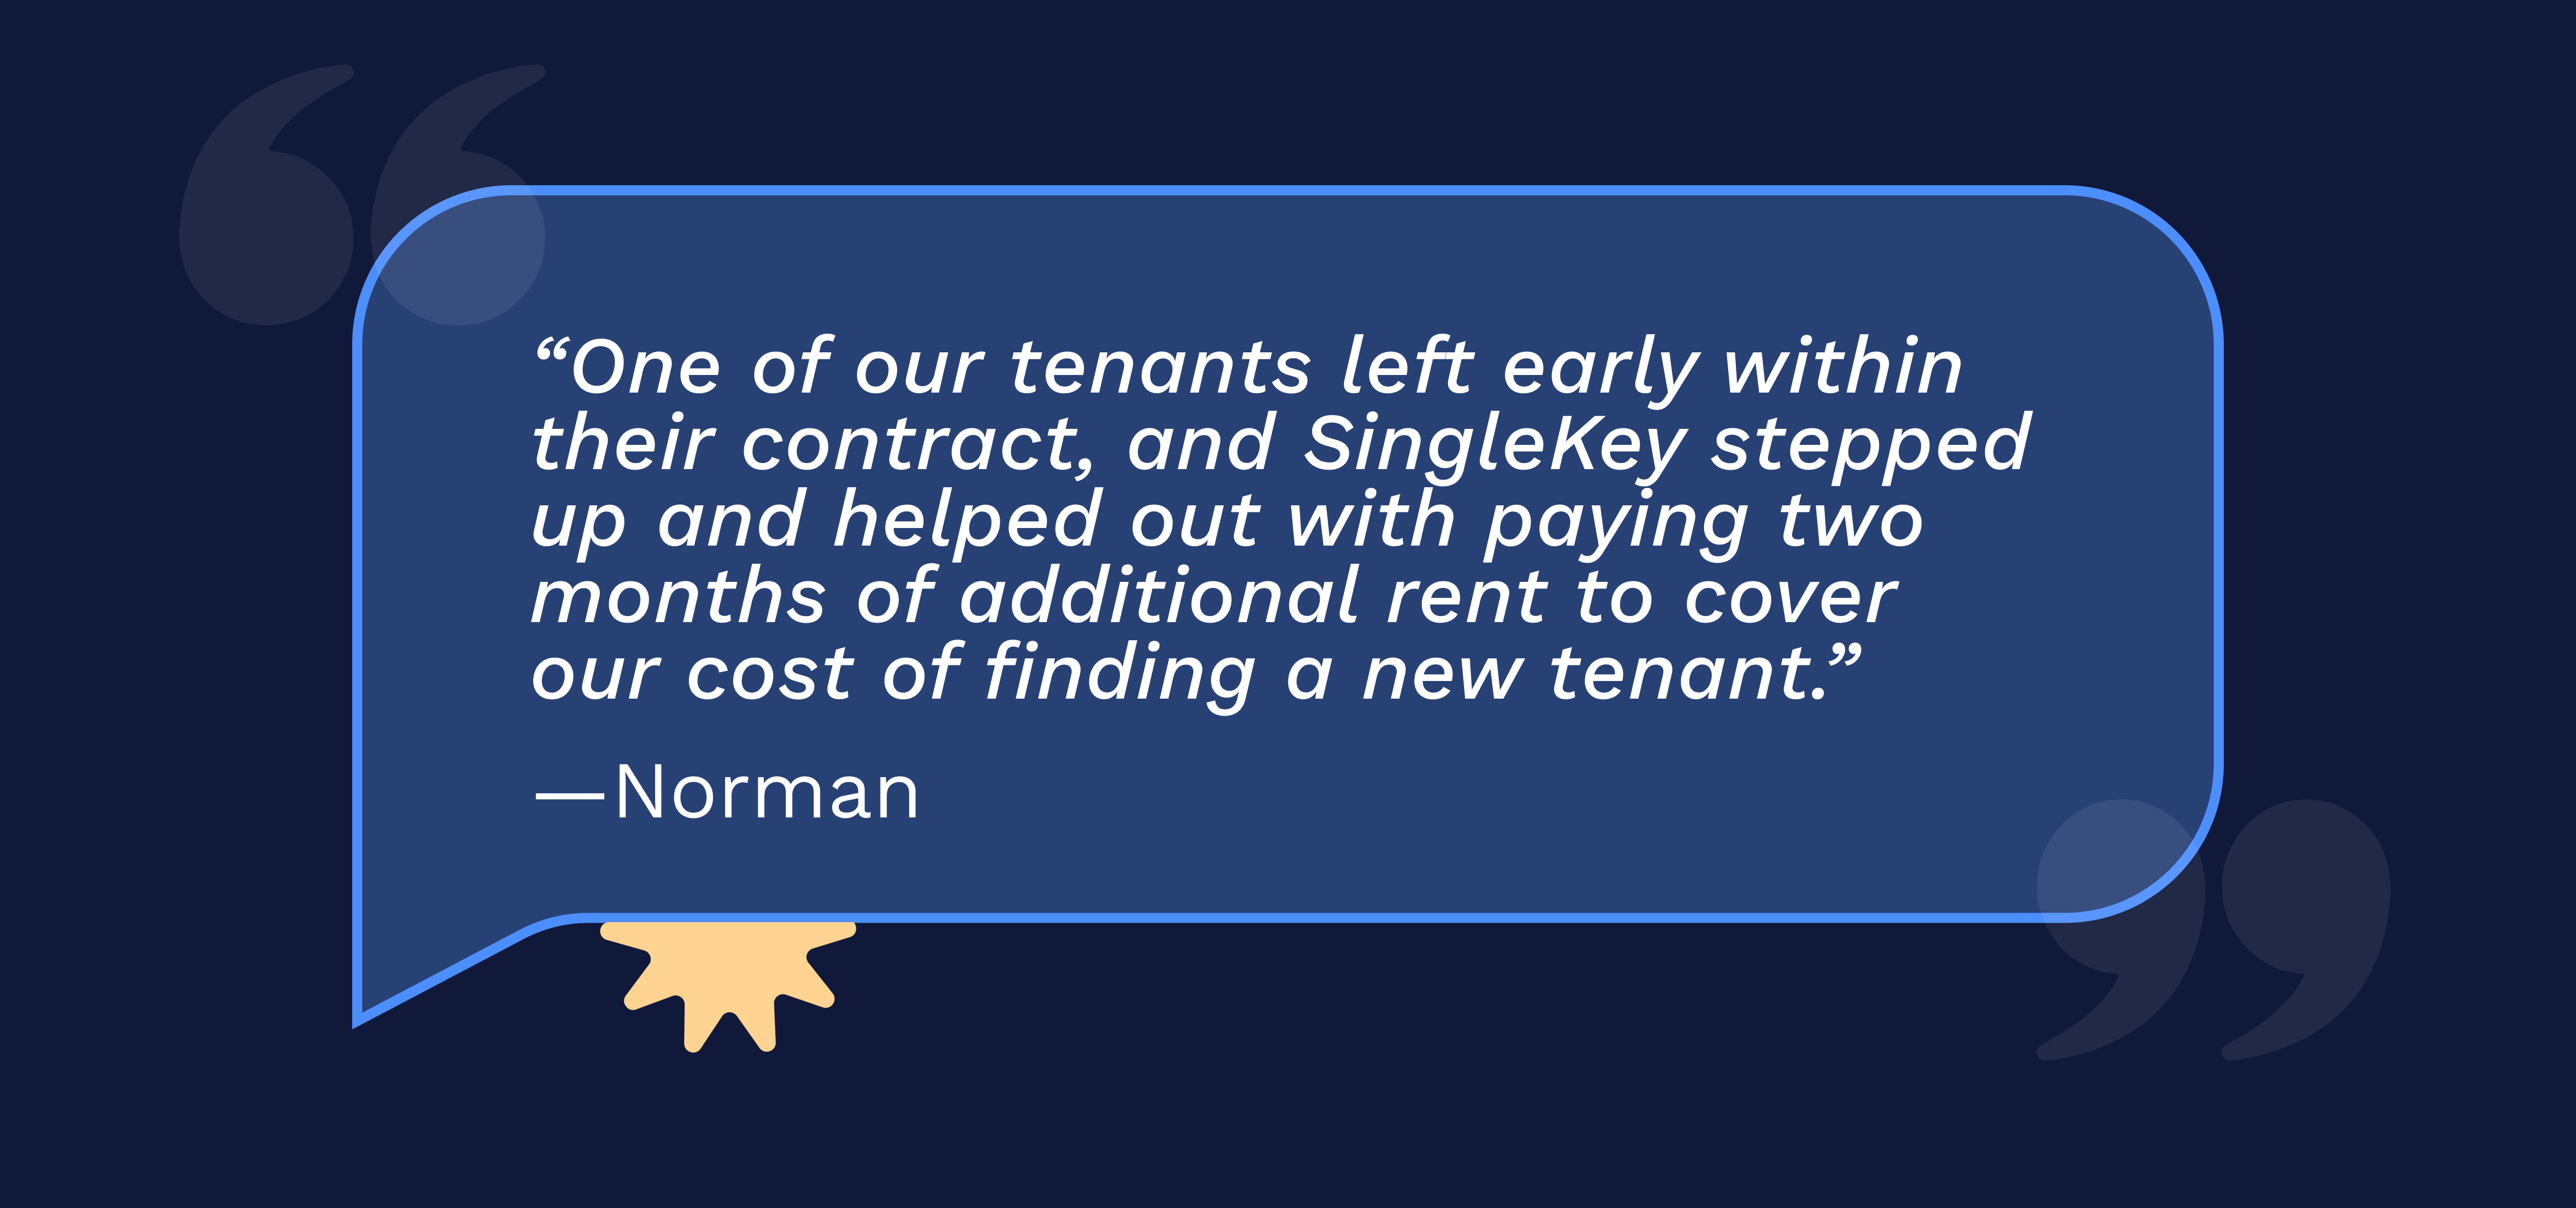 “One of our tenants left early within their contract, and SingleKey stepped up and helped out with paying two months of additional rent to cover our cost of finding a new tenant.” -Norman